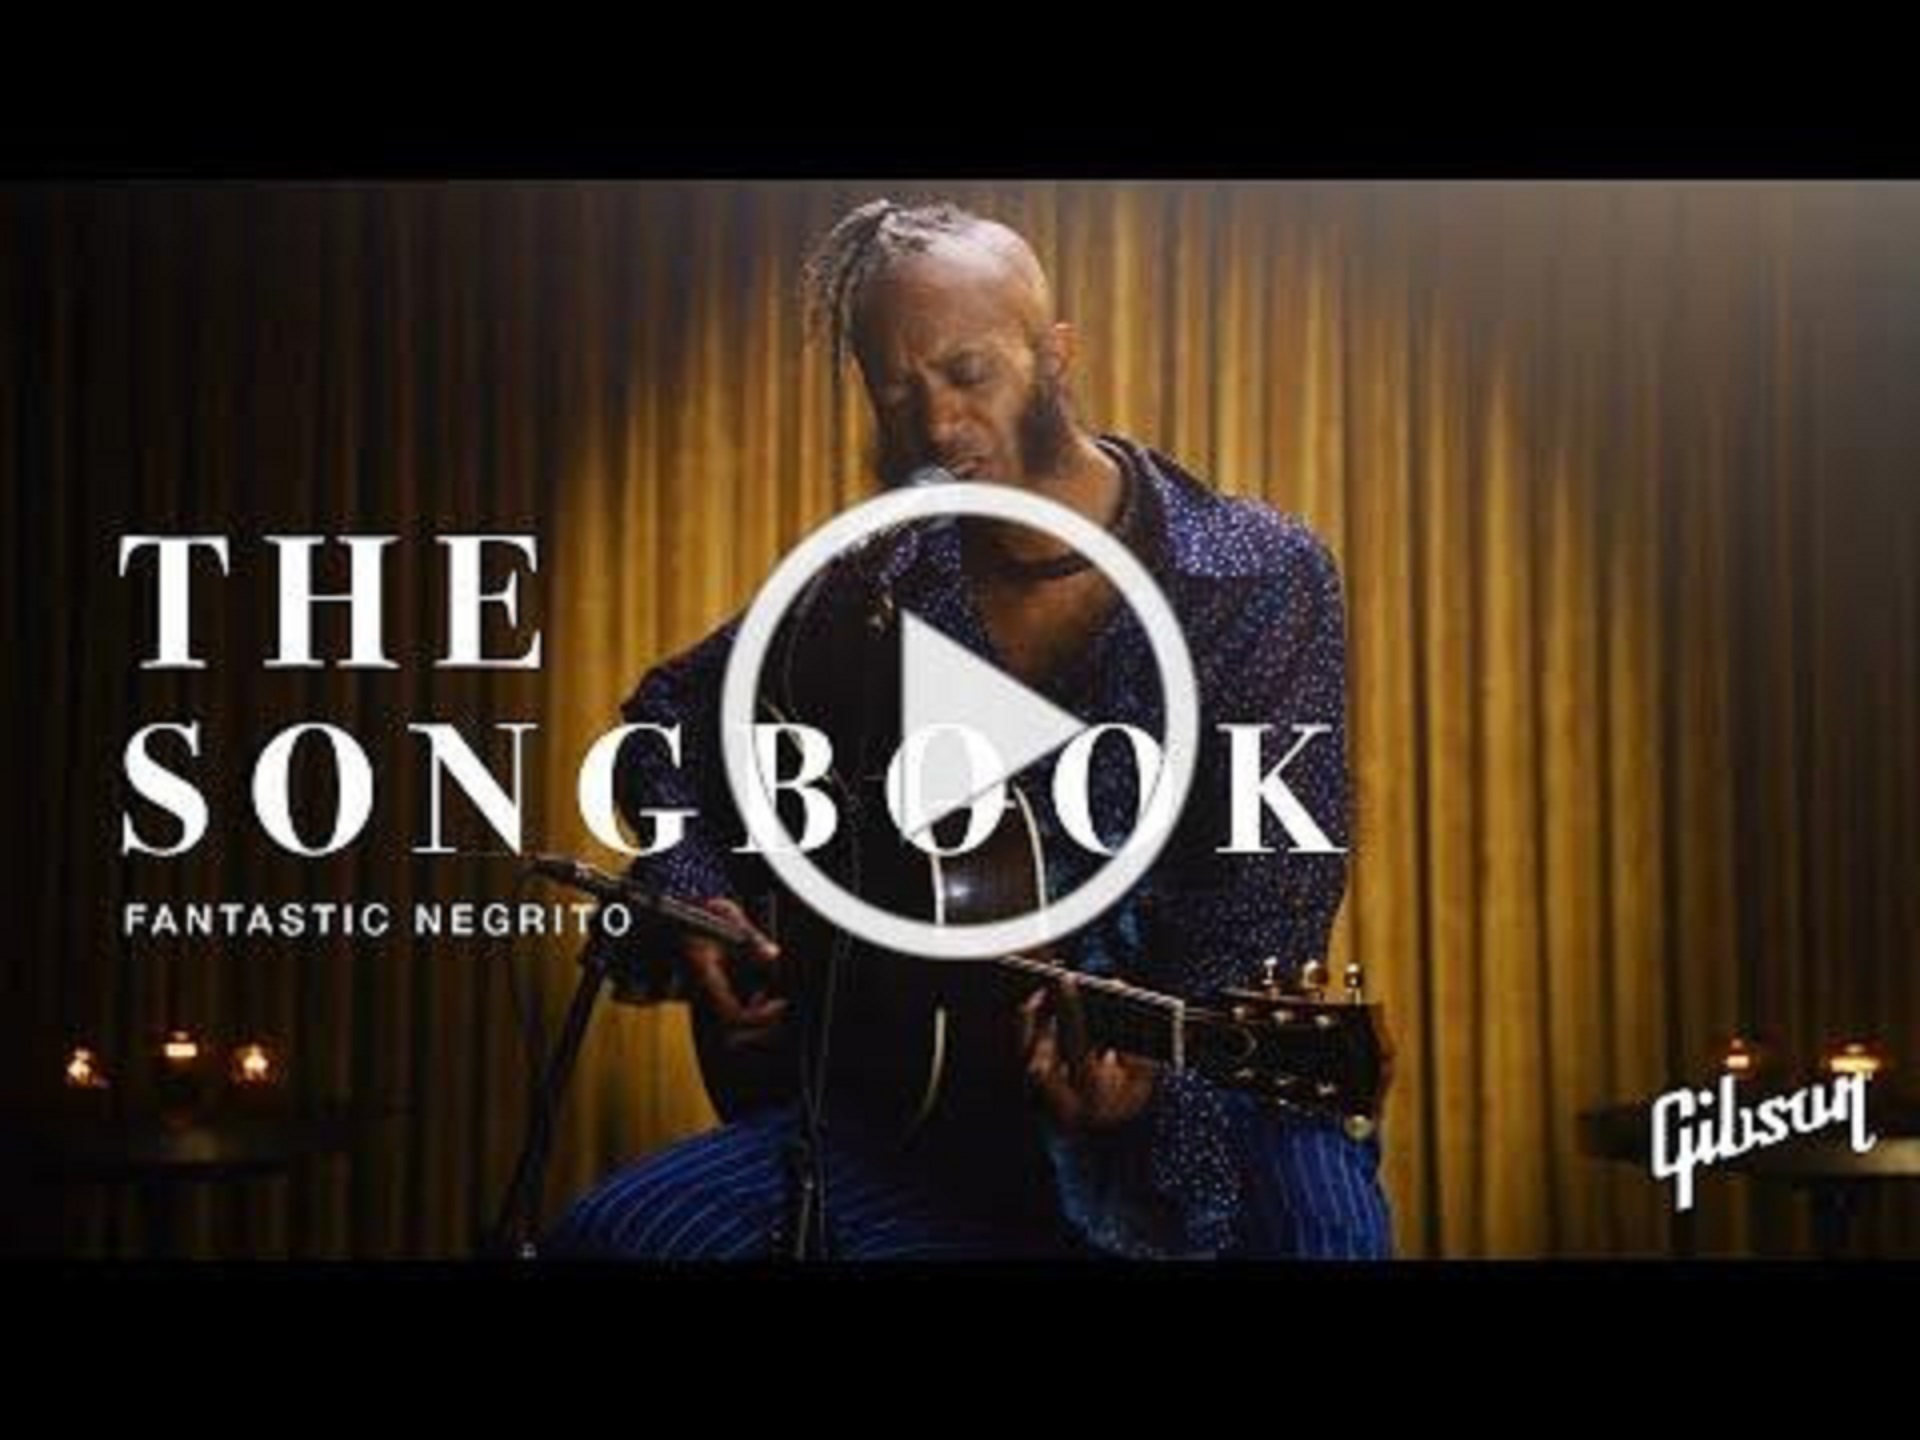 Watch Fantastic Negrito on "The Songbook," Original Series Streaming Now on Gibson TV